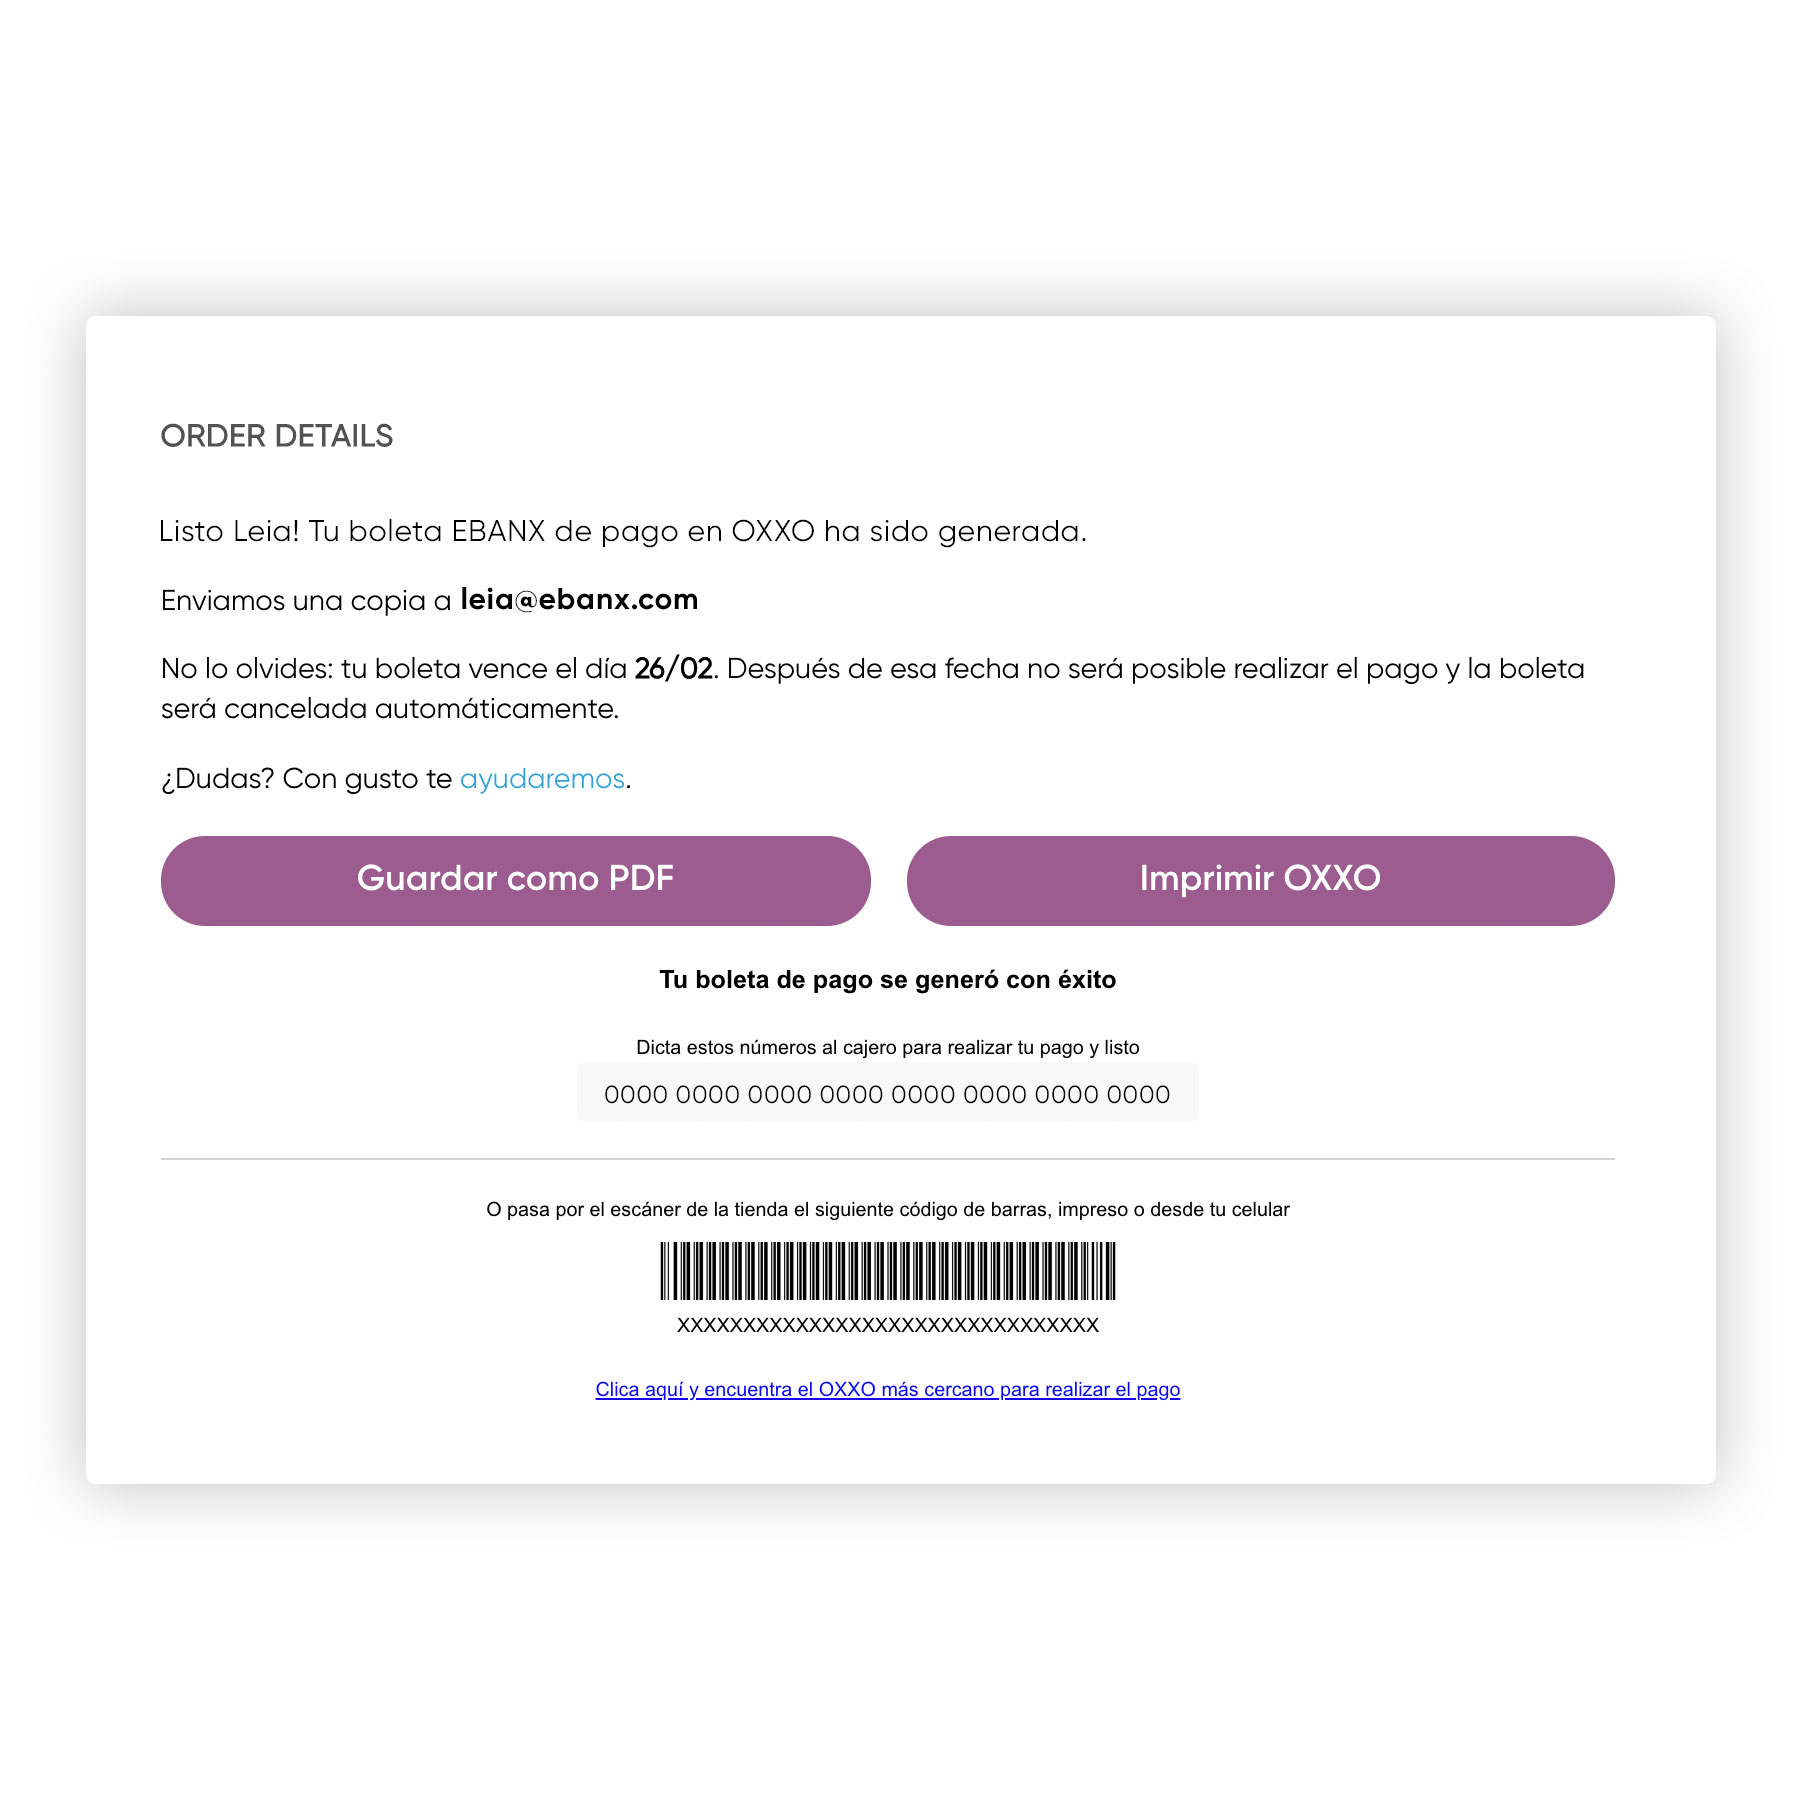 EBANX Features - Choosing the EBANX Plugin for WooCommerce your Latin American customers will be able to pay with local methods, such as boleto, OXXO, baloto, etc. One type of cash payment method that can be printed or a virtual voucher like this image above.